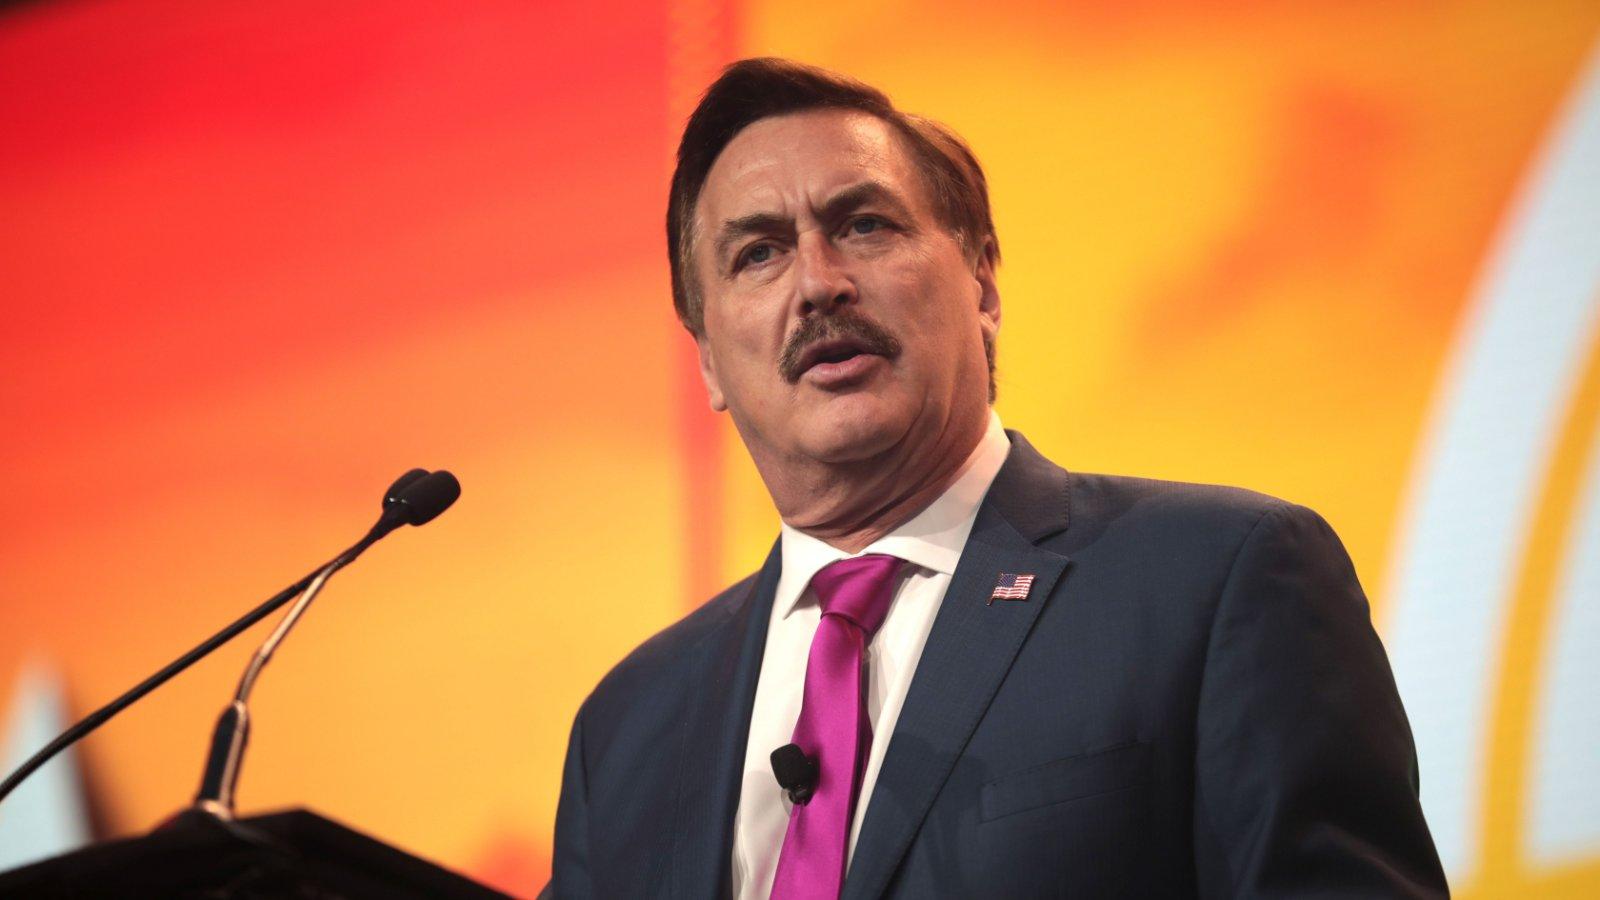 Mike Lindell delivers a speech